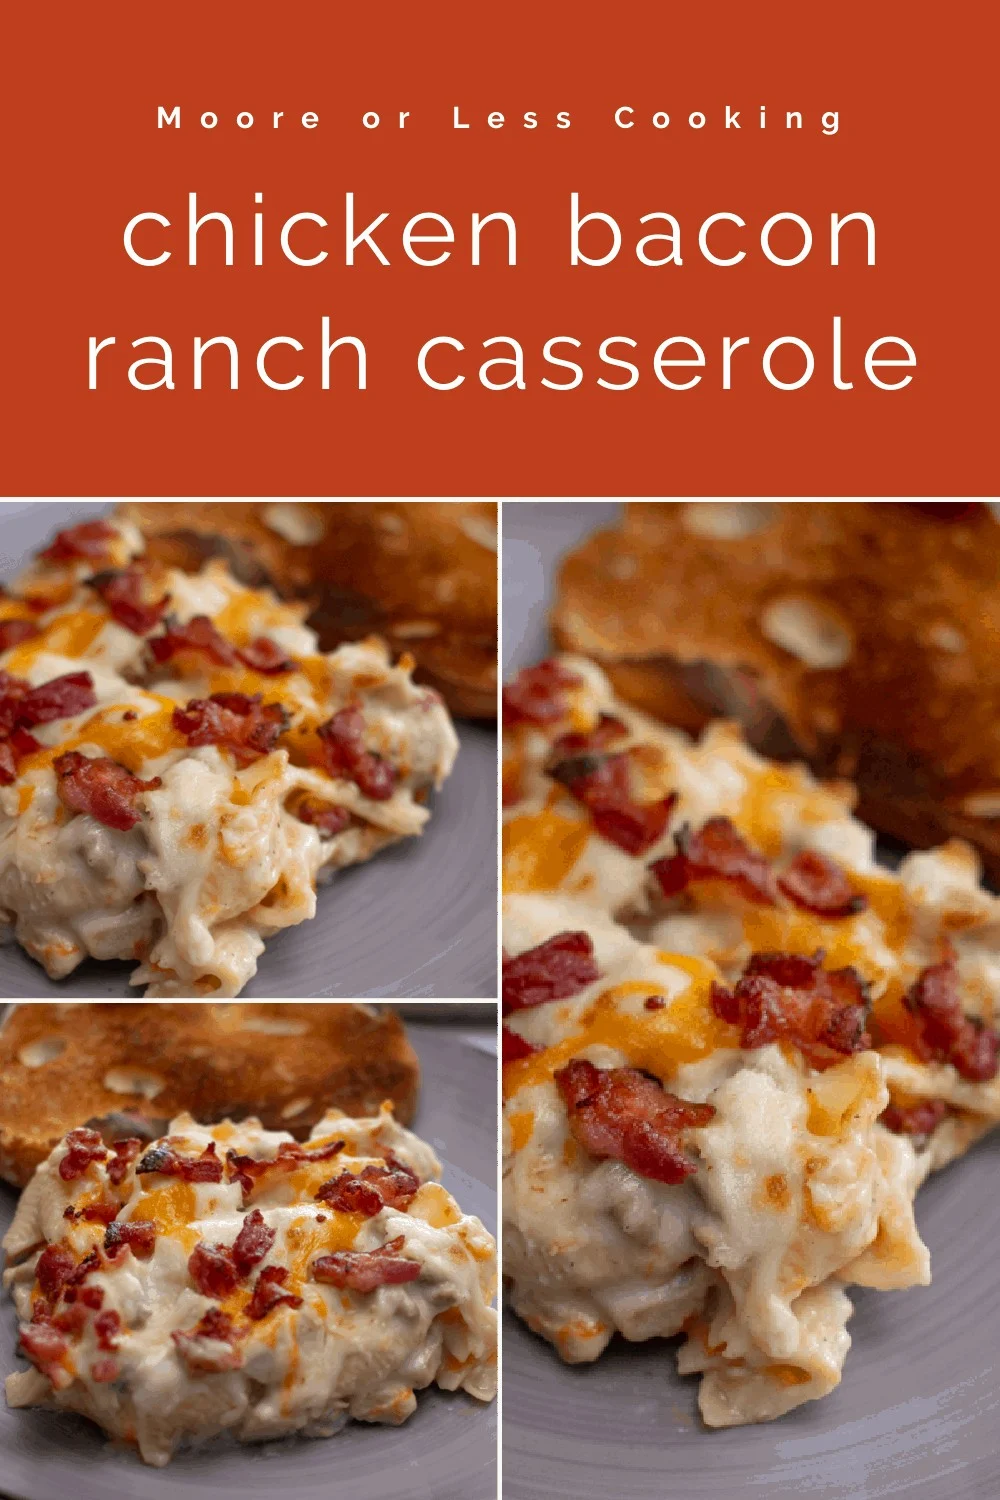 pin 3 images chicken bacon ranch casserole